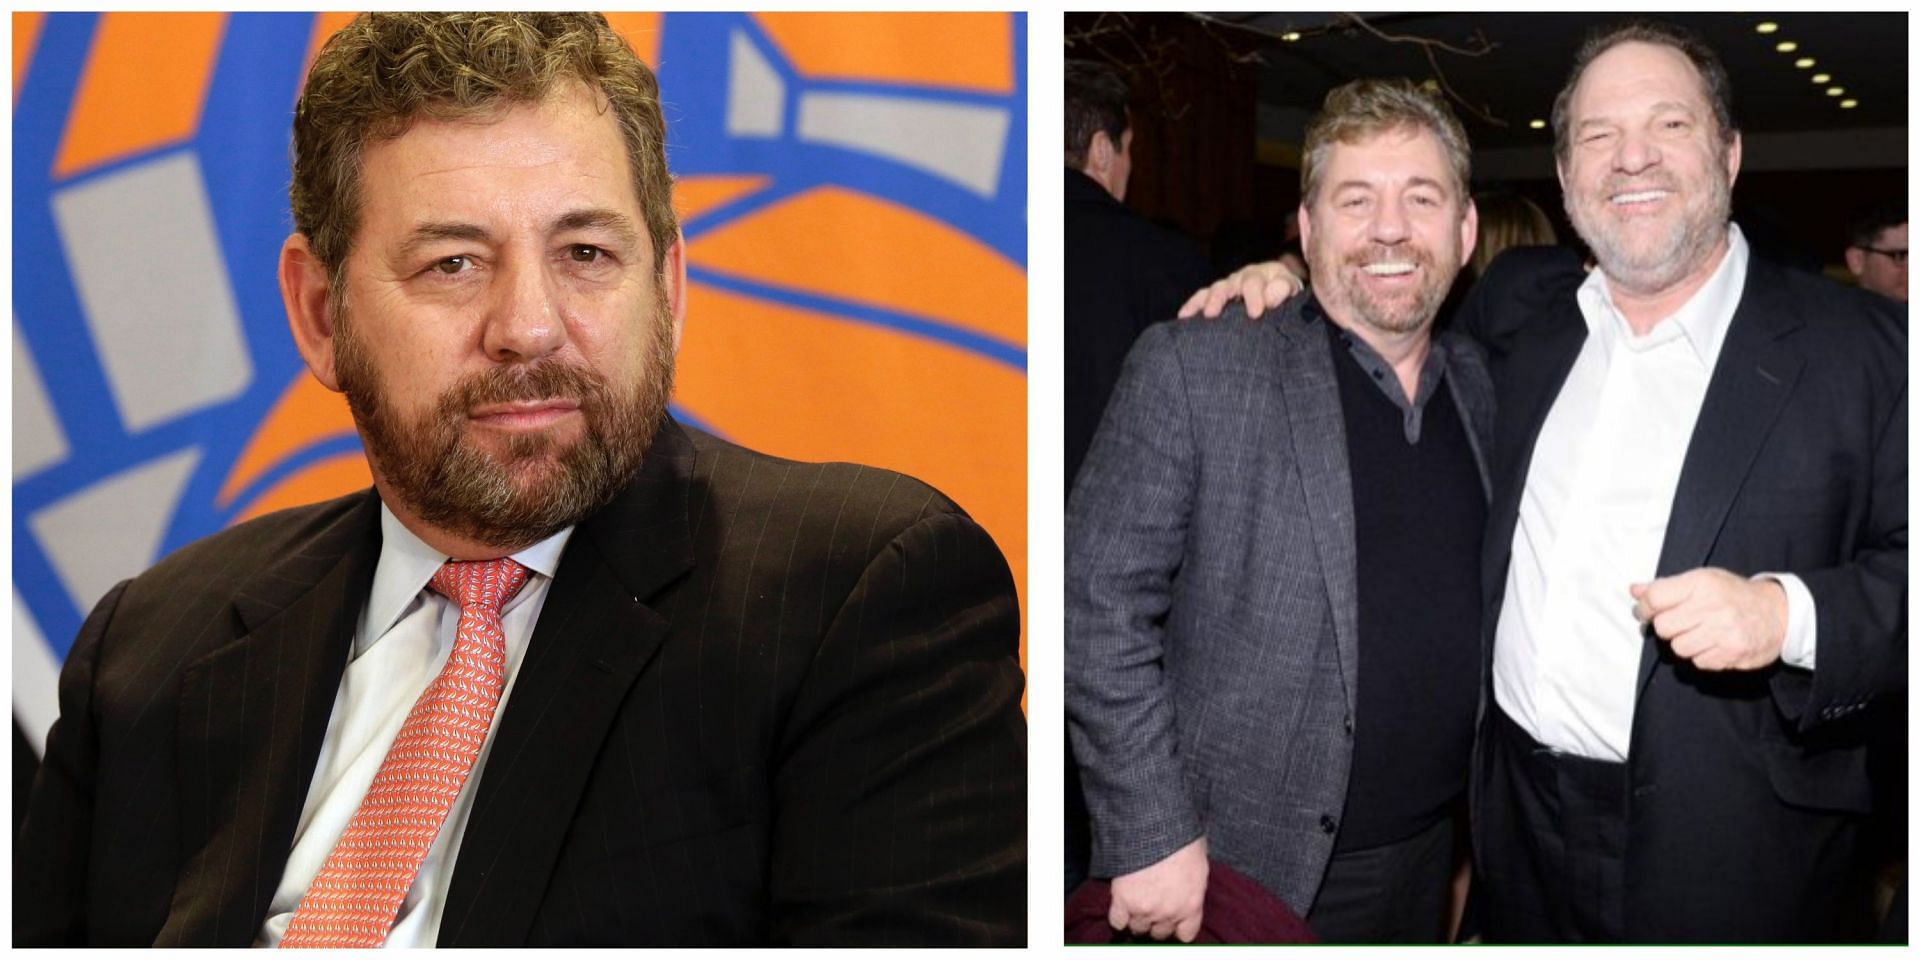 What did New York Knicks owner James Dolan do?